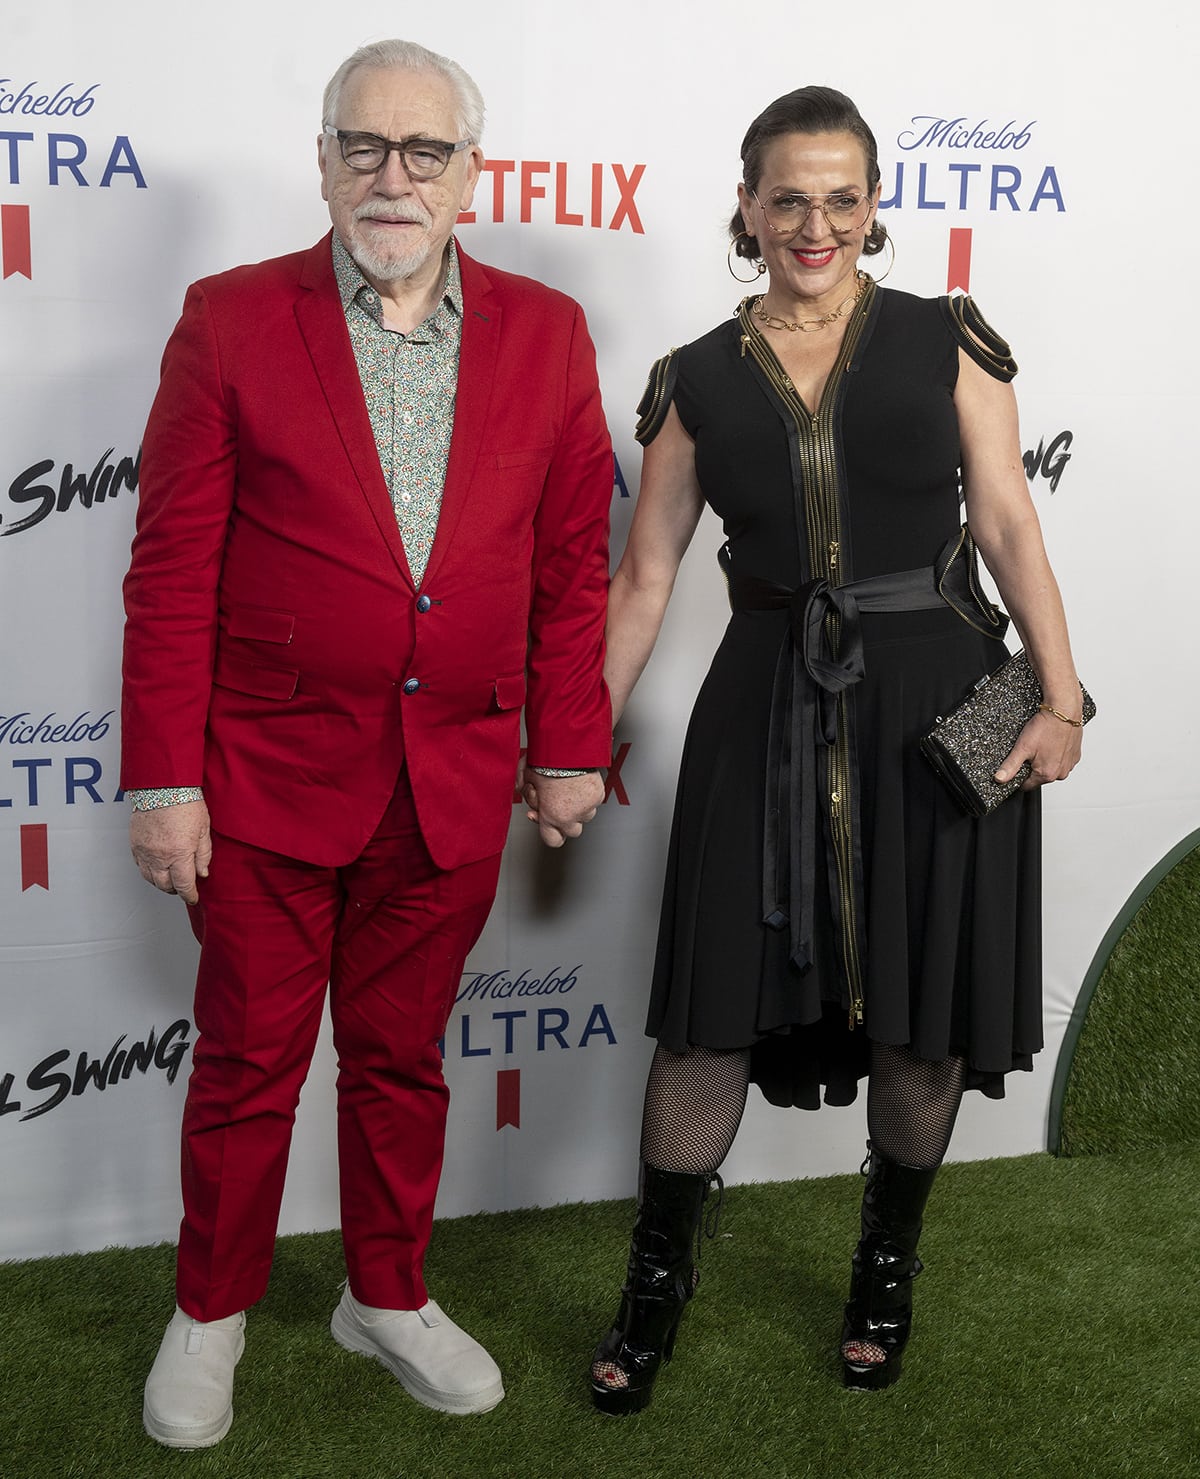 Scottish actor Brian Cox and his wife Nicole Ansari-Cox also graced the Michelob ULTRA x Netflix Full Swing & Super Bowl Party